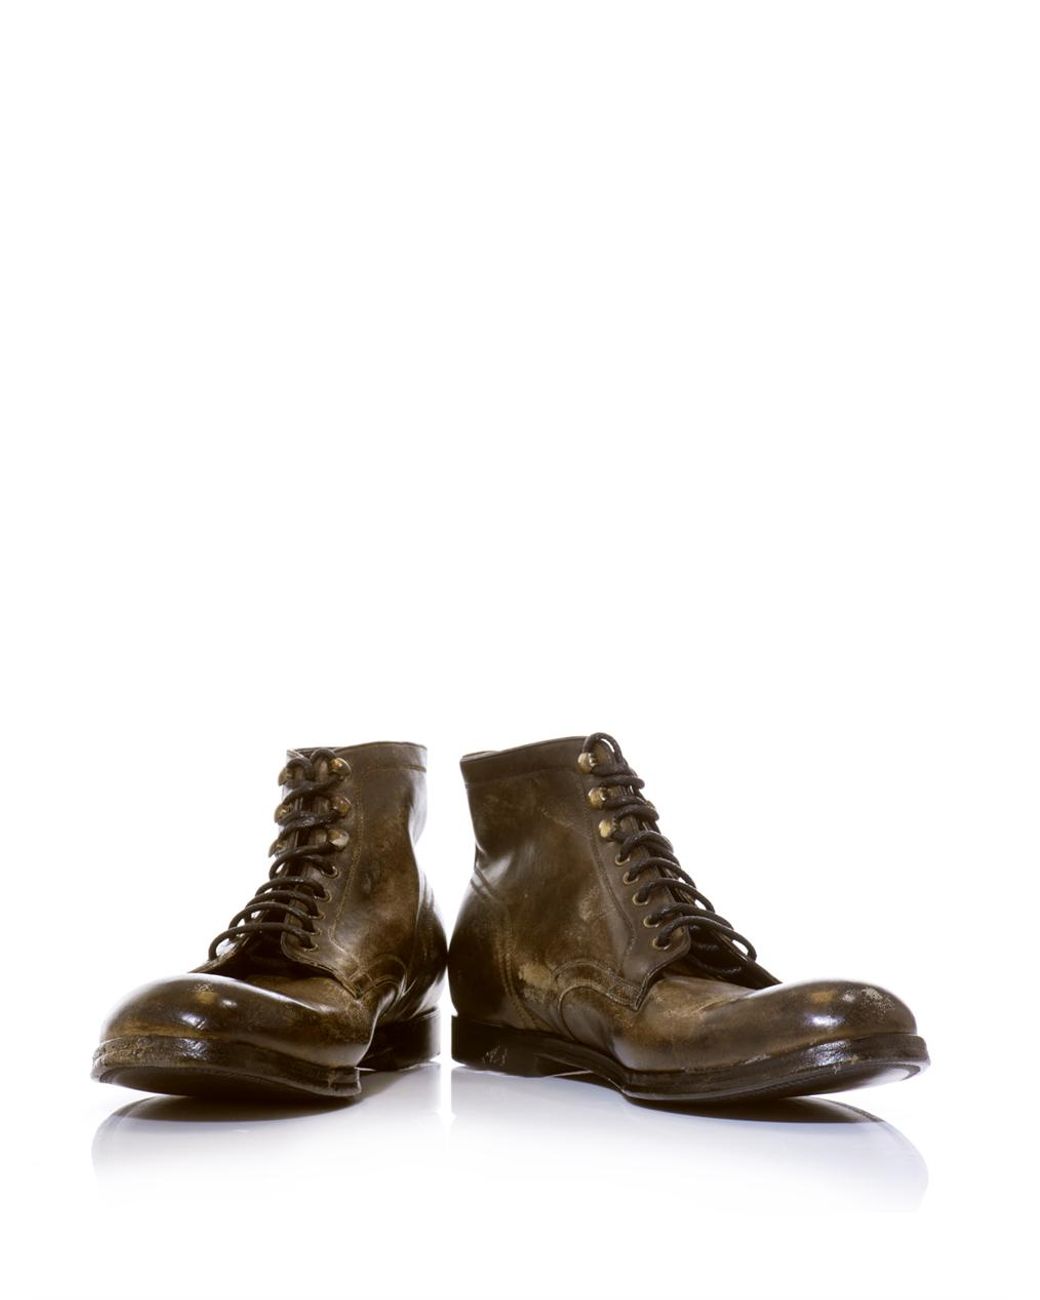 Mens Distressed Leather Boots | vlr.eng.br